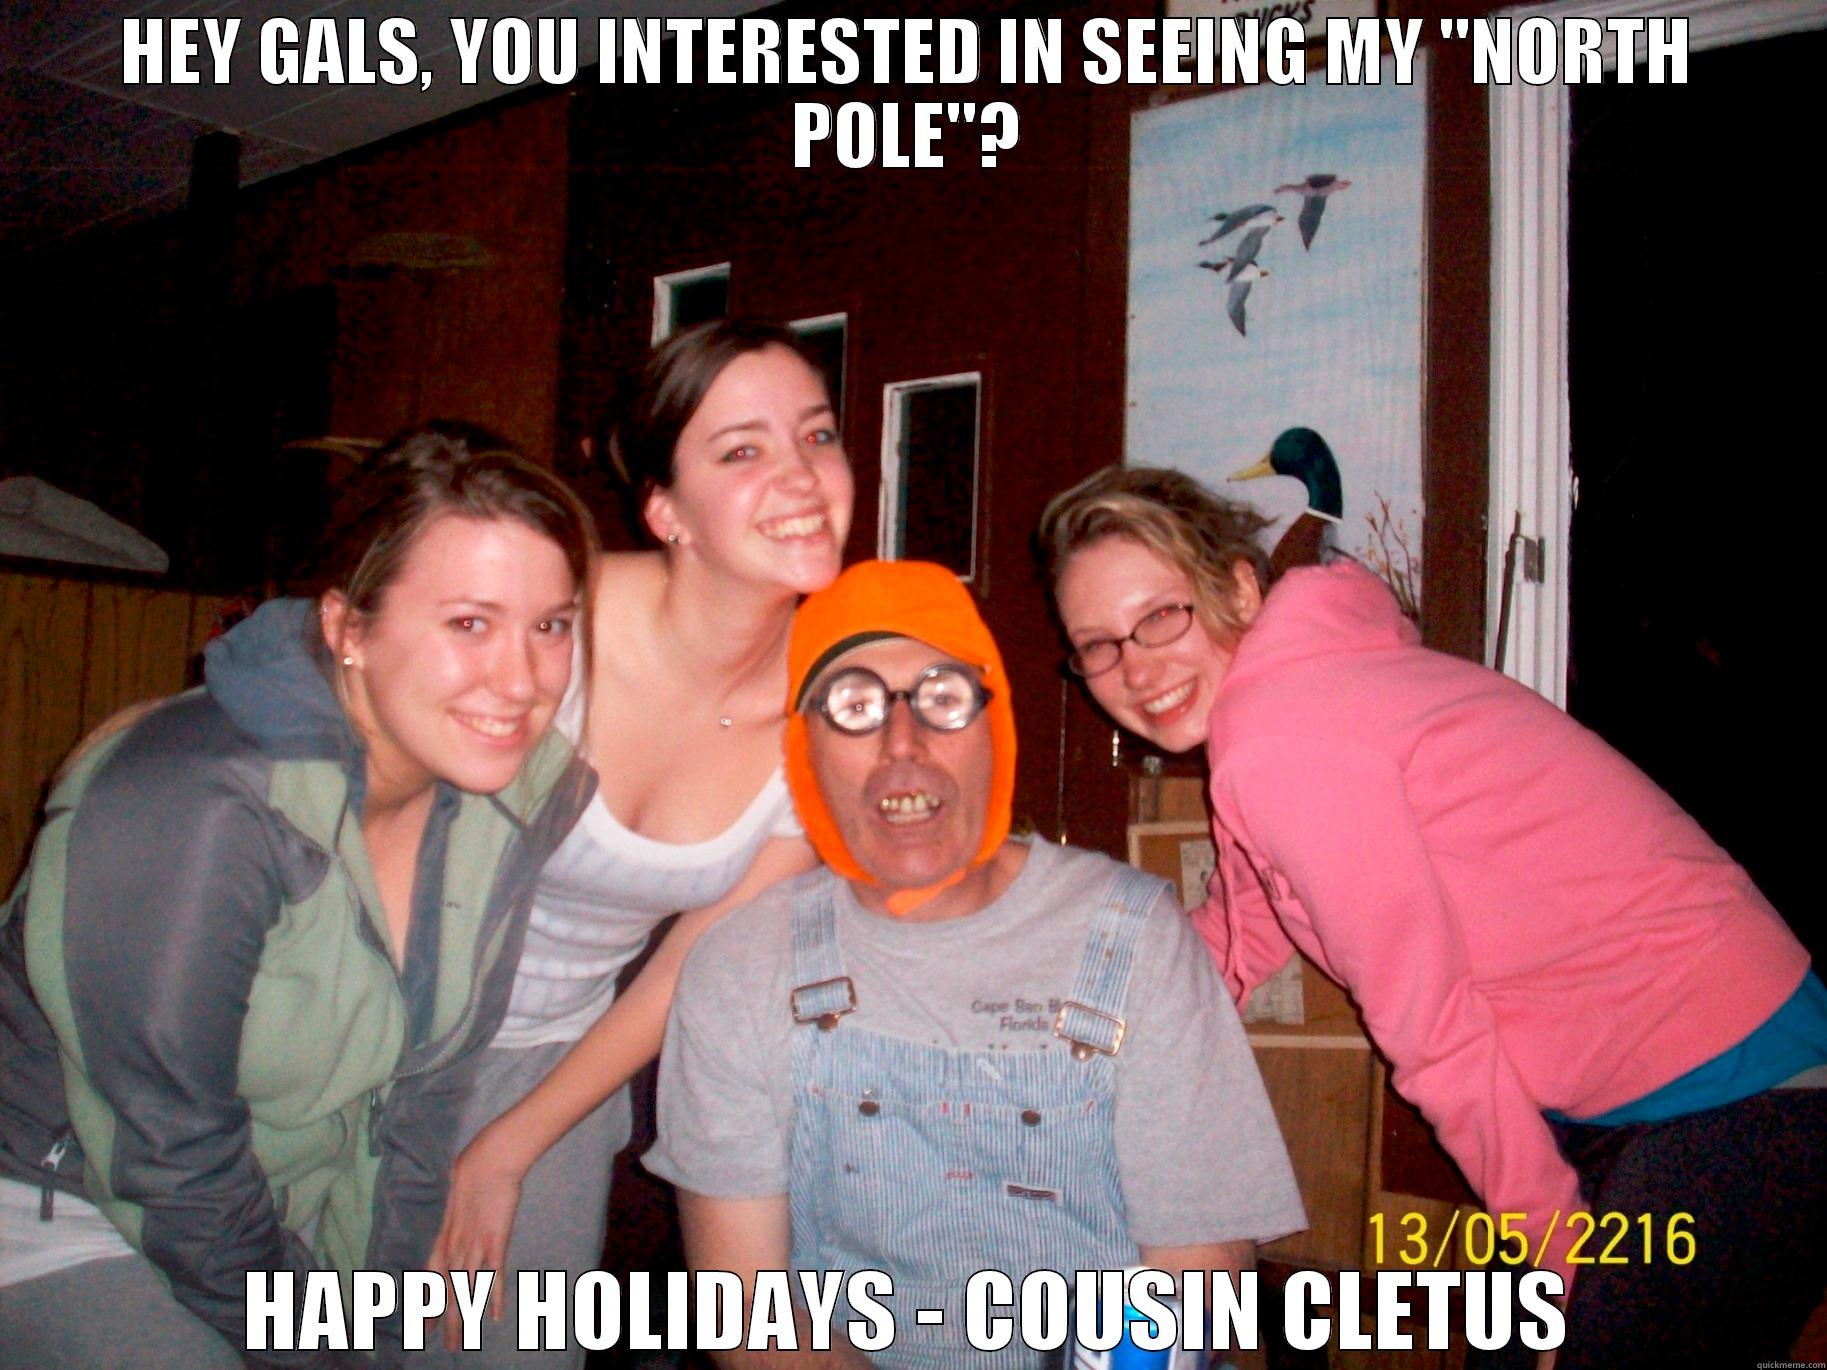 Happy Holi-daze - HEY GALS, YOU INTERESTED IN SEEING MY 